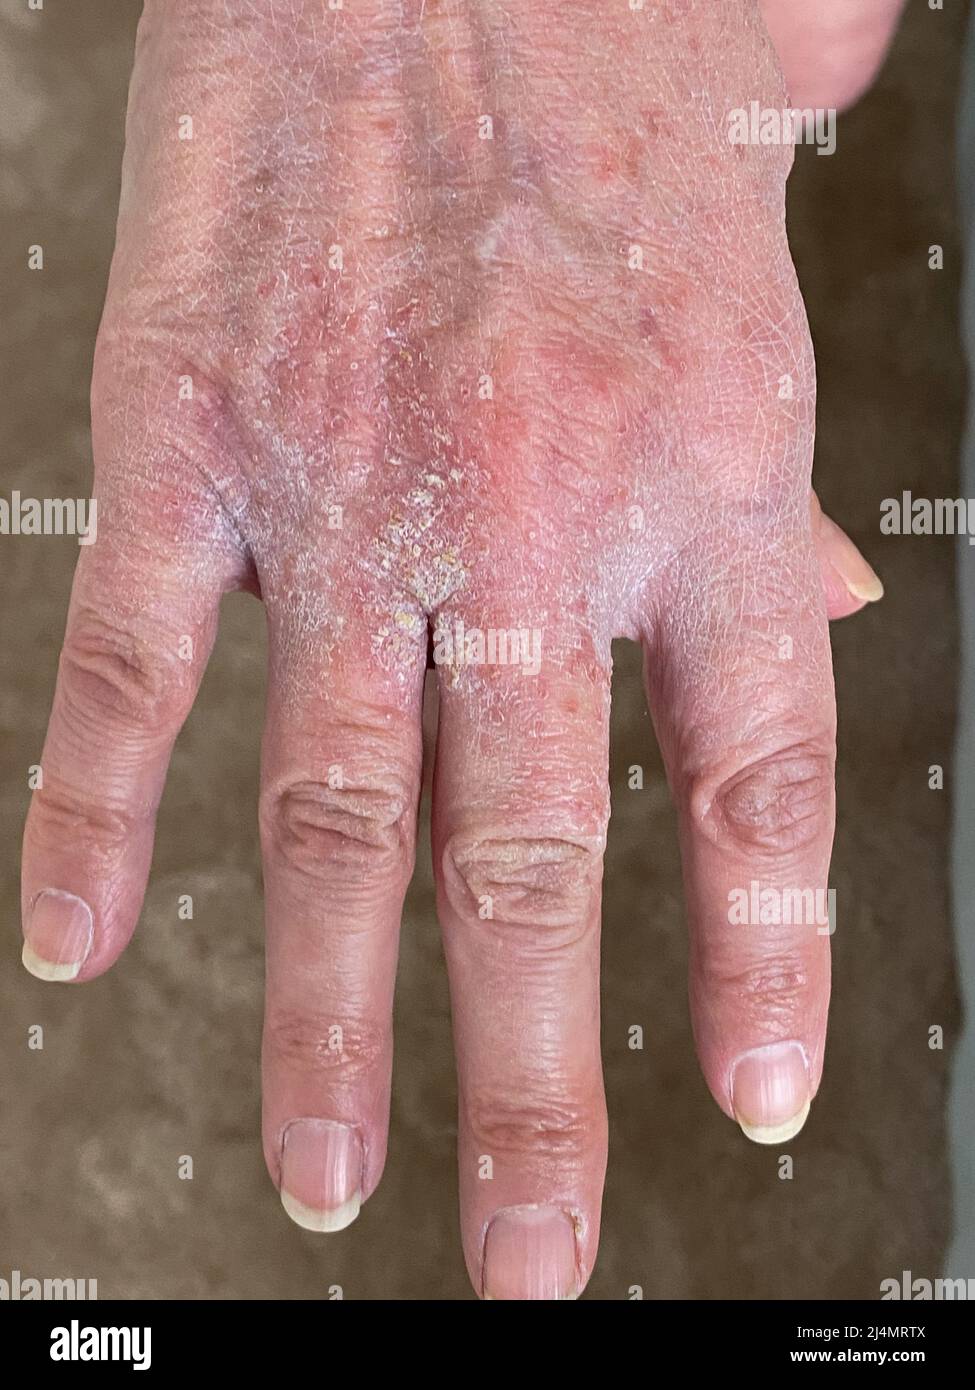 Hand with skin infection Stock Photo